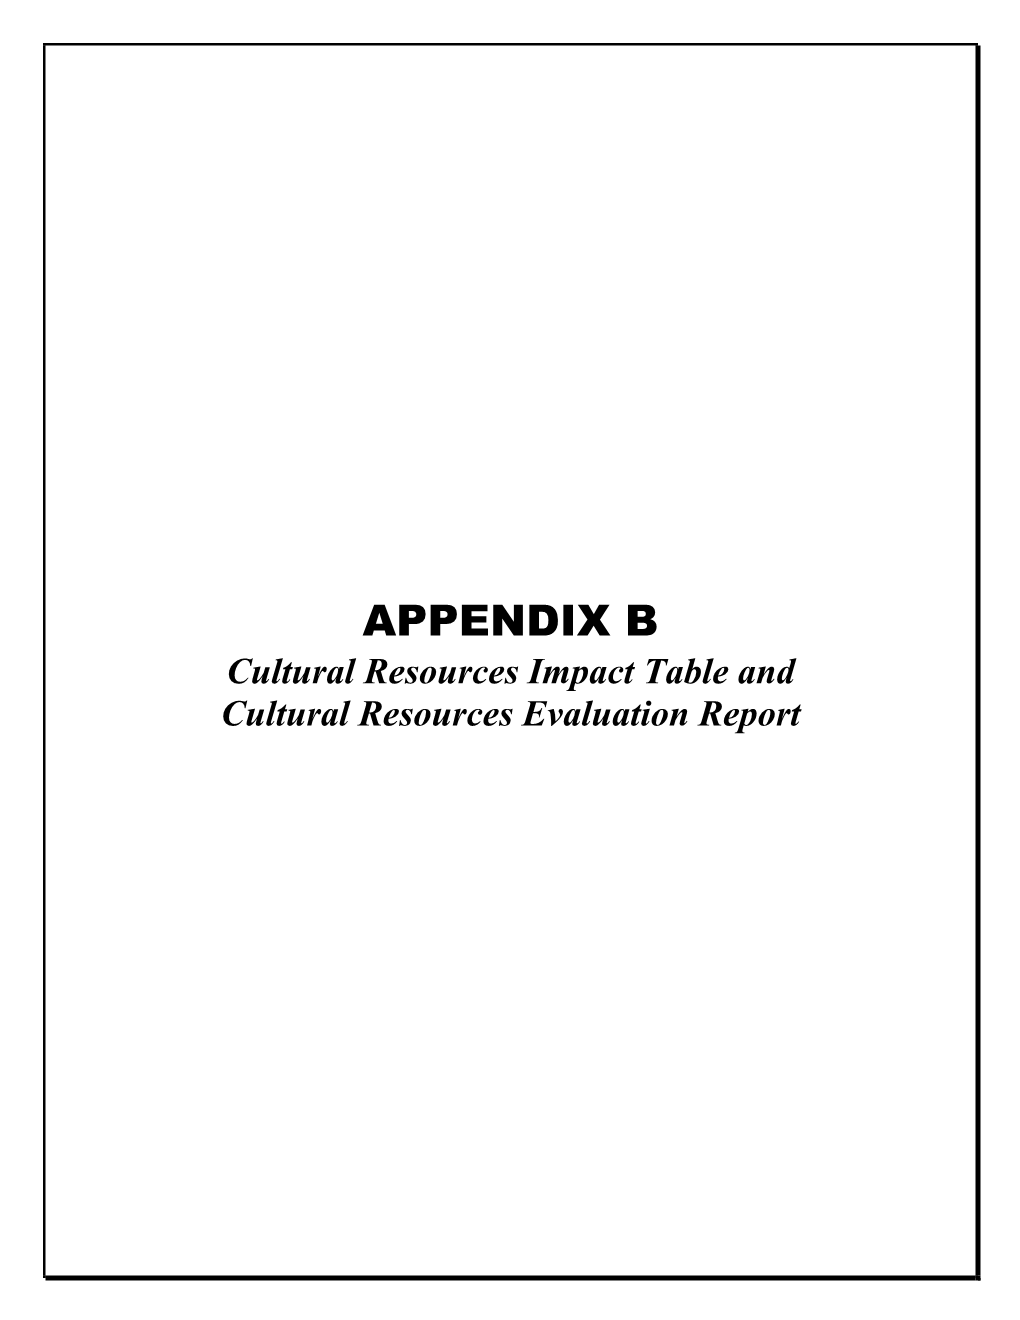 APPENDIX B Cultural Resources Impact Table and Cultural Resources Evaluation Report